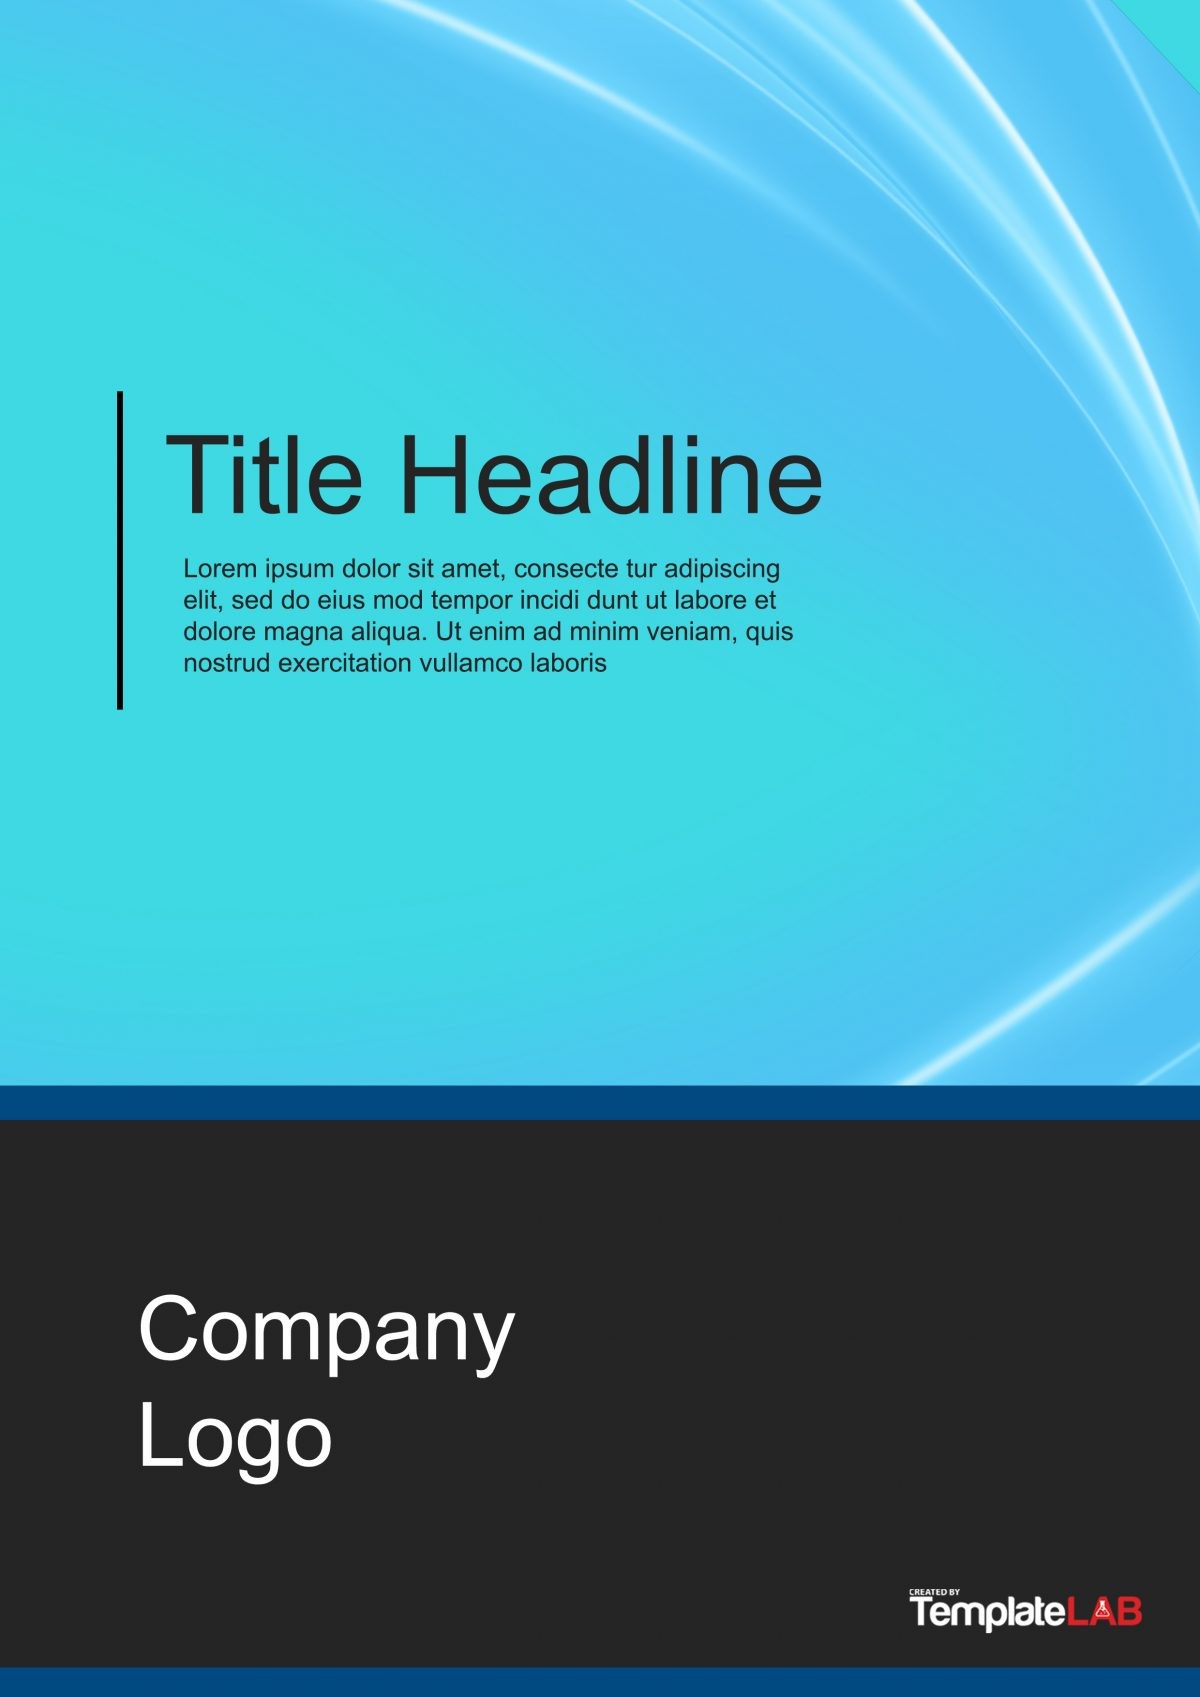 Free Cover Page Template 3 - TemplateLab